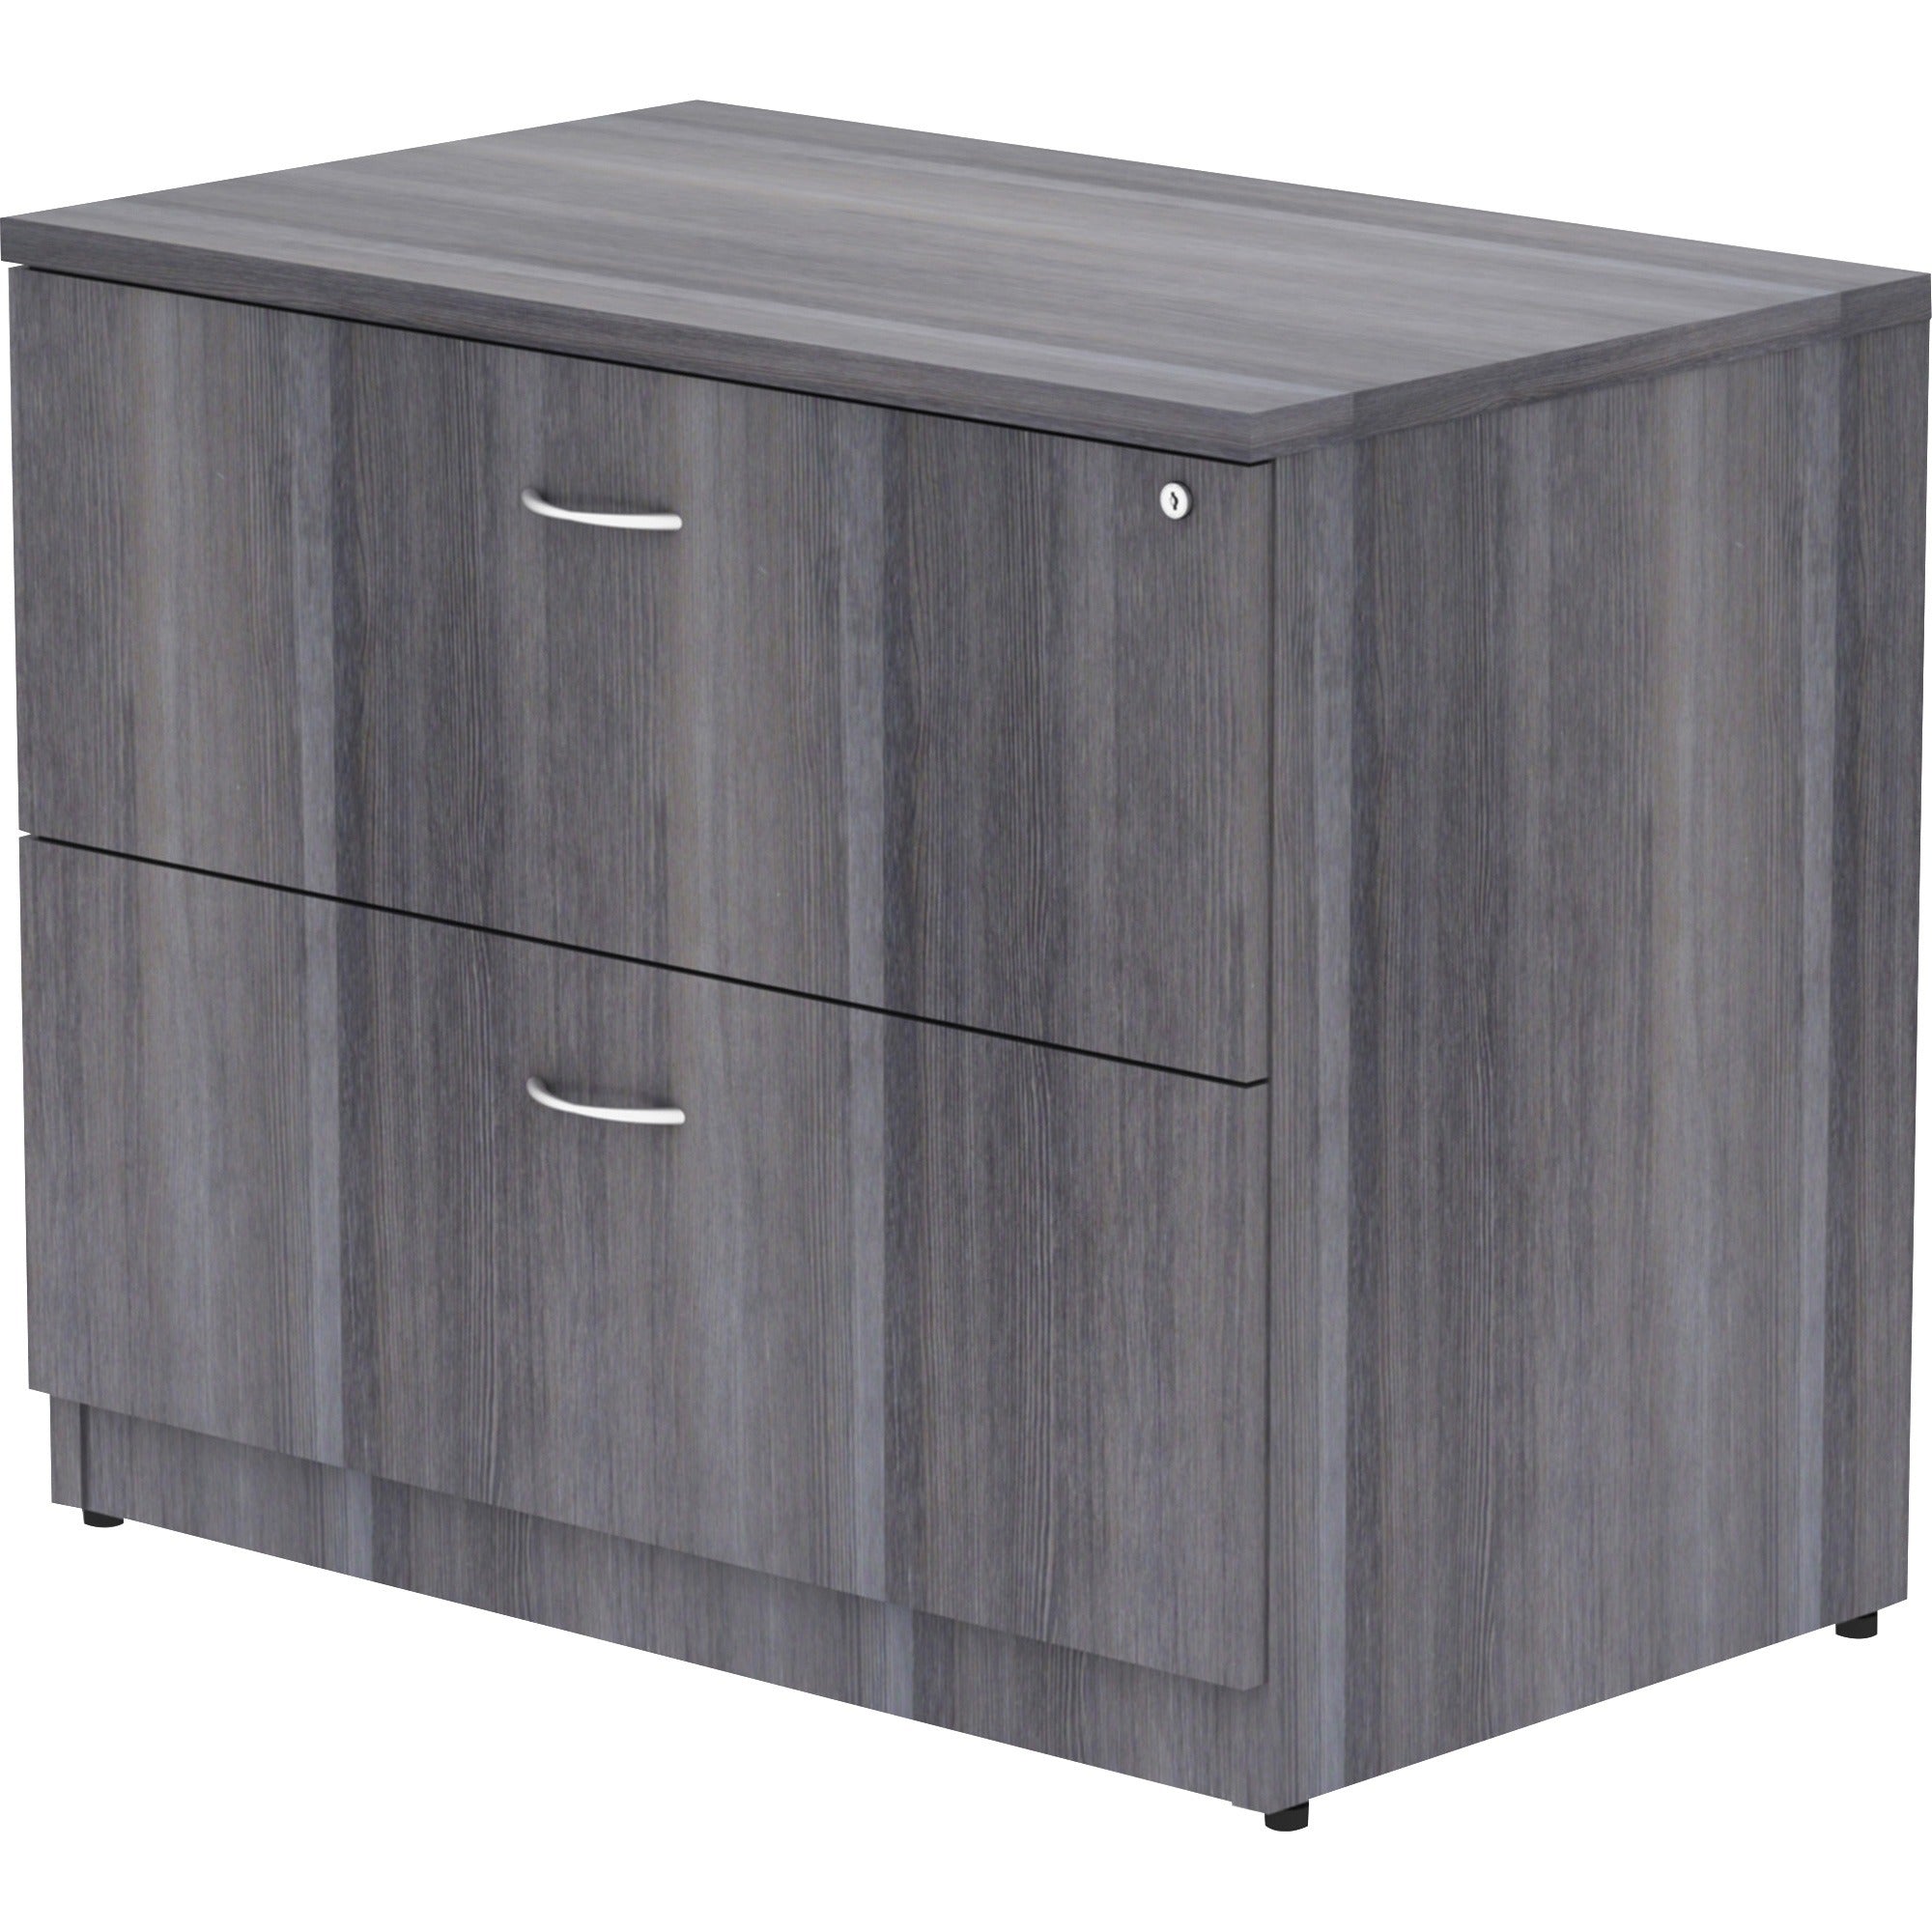 lorell-essentials-series-lateral-file-35-x-22295--1-top-2-x-file-drawers-finish-weathered-charcoal-laminate_llr69563 - 3